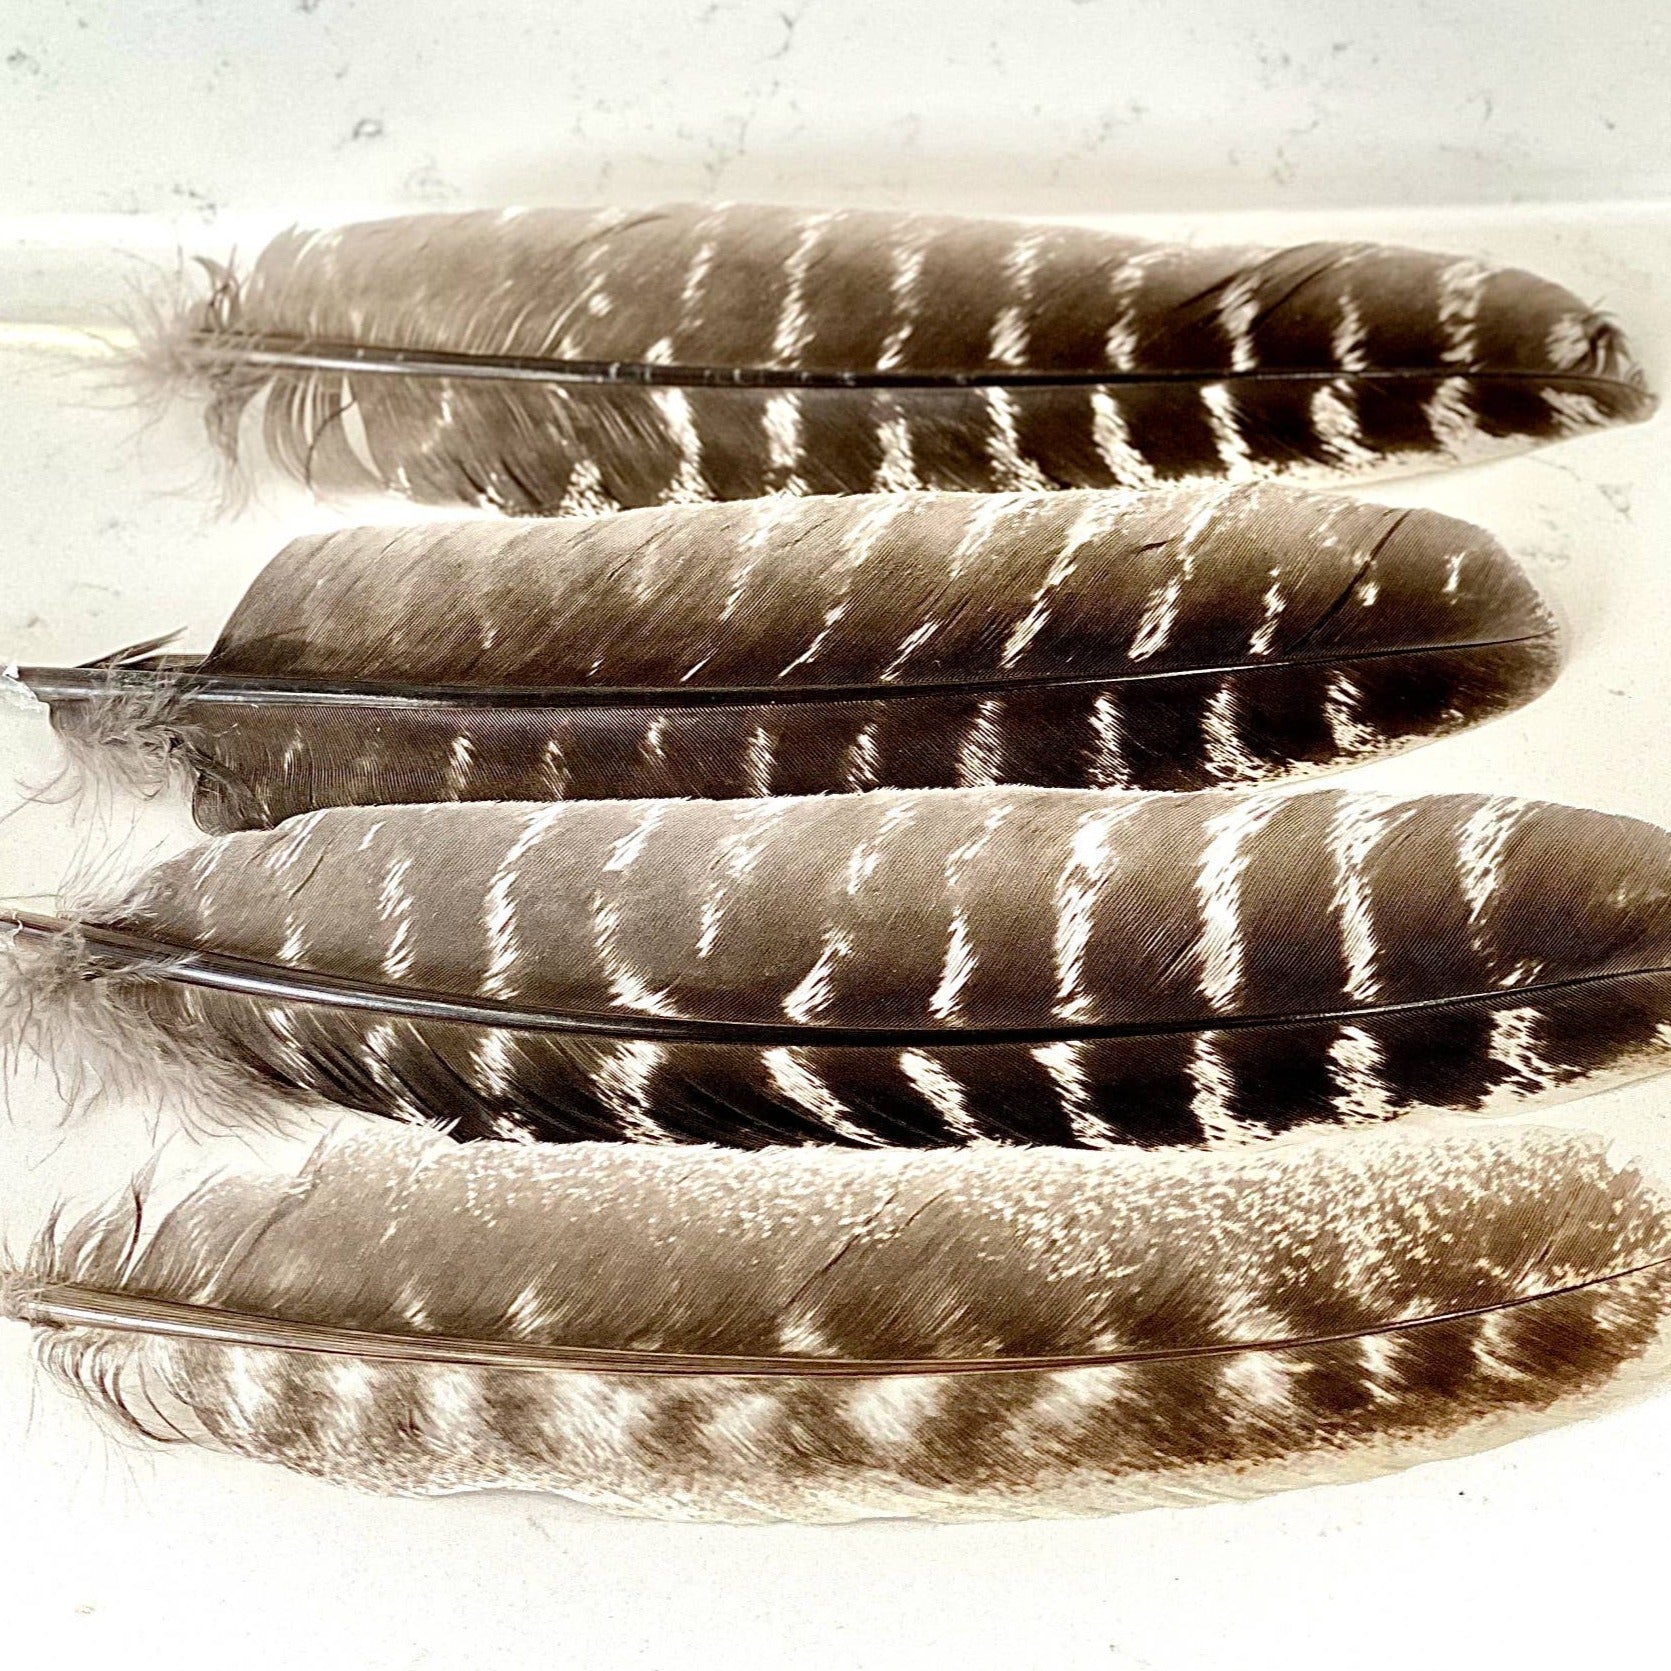 Feathers for Smudging - Feather